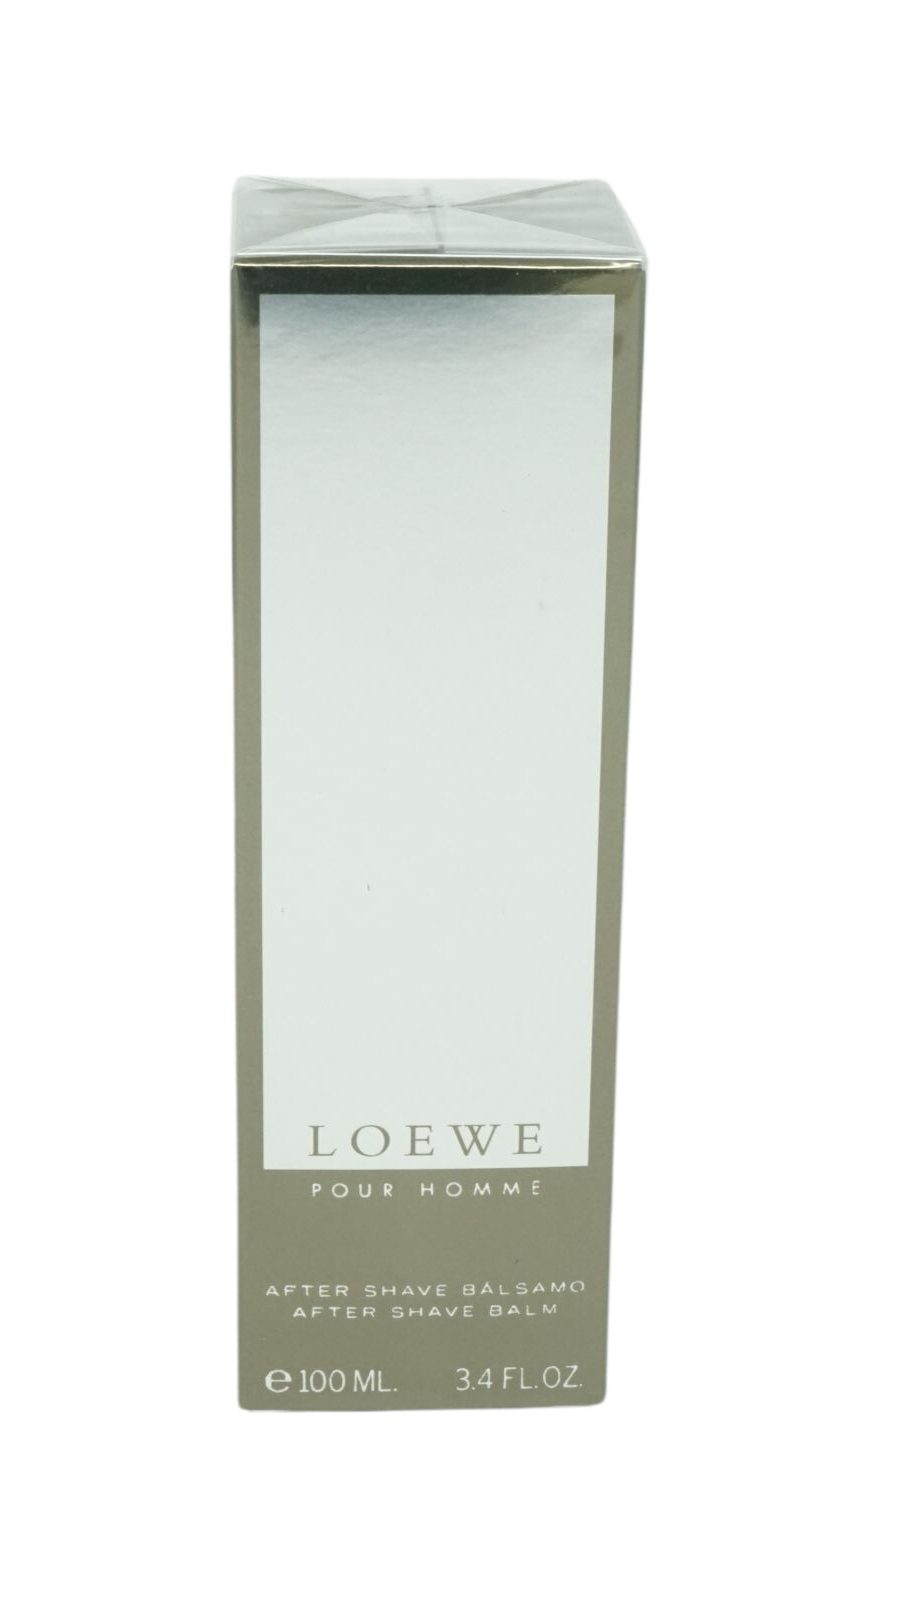 Homme After-Shave Loewe Balm Shave Loewe Balsam After 100ml Pour